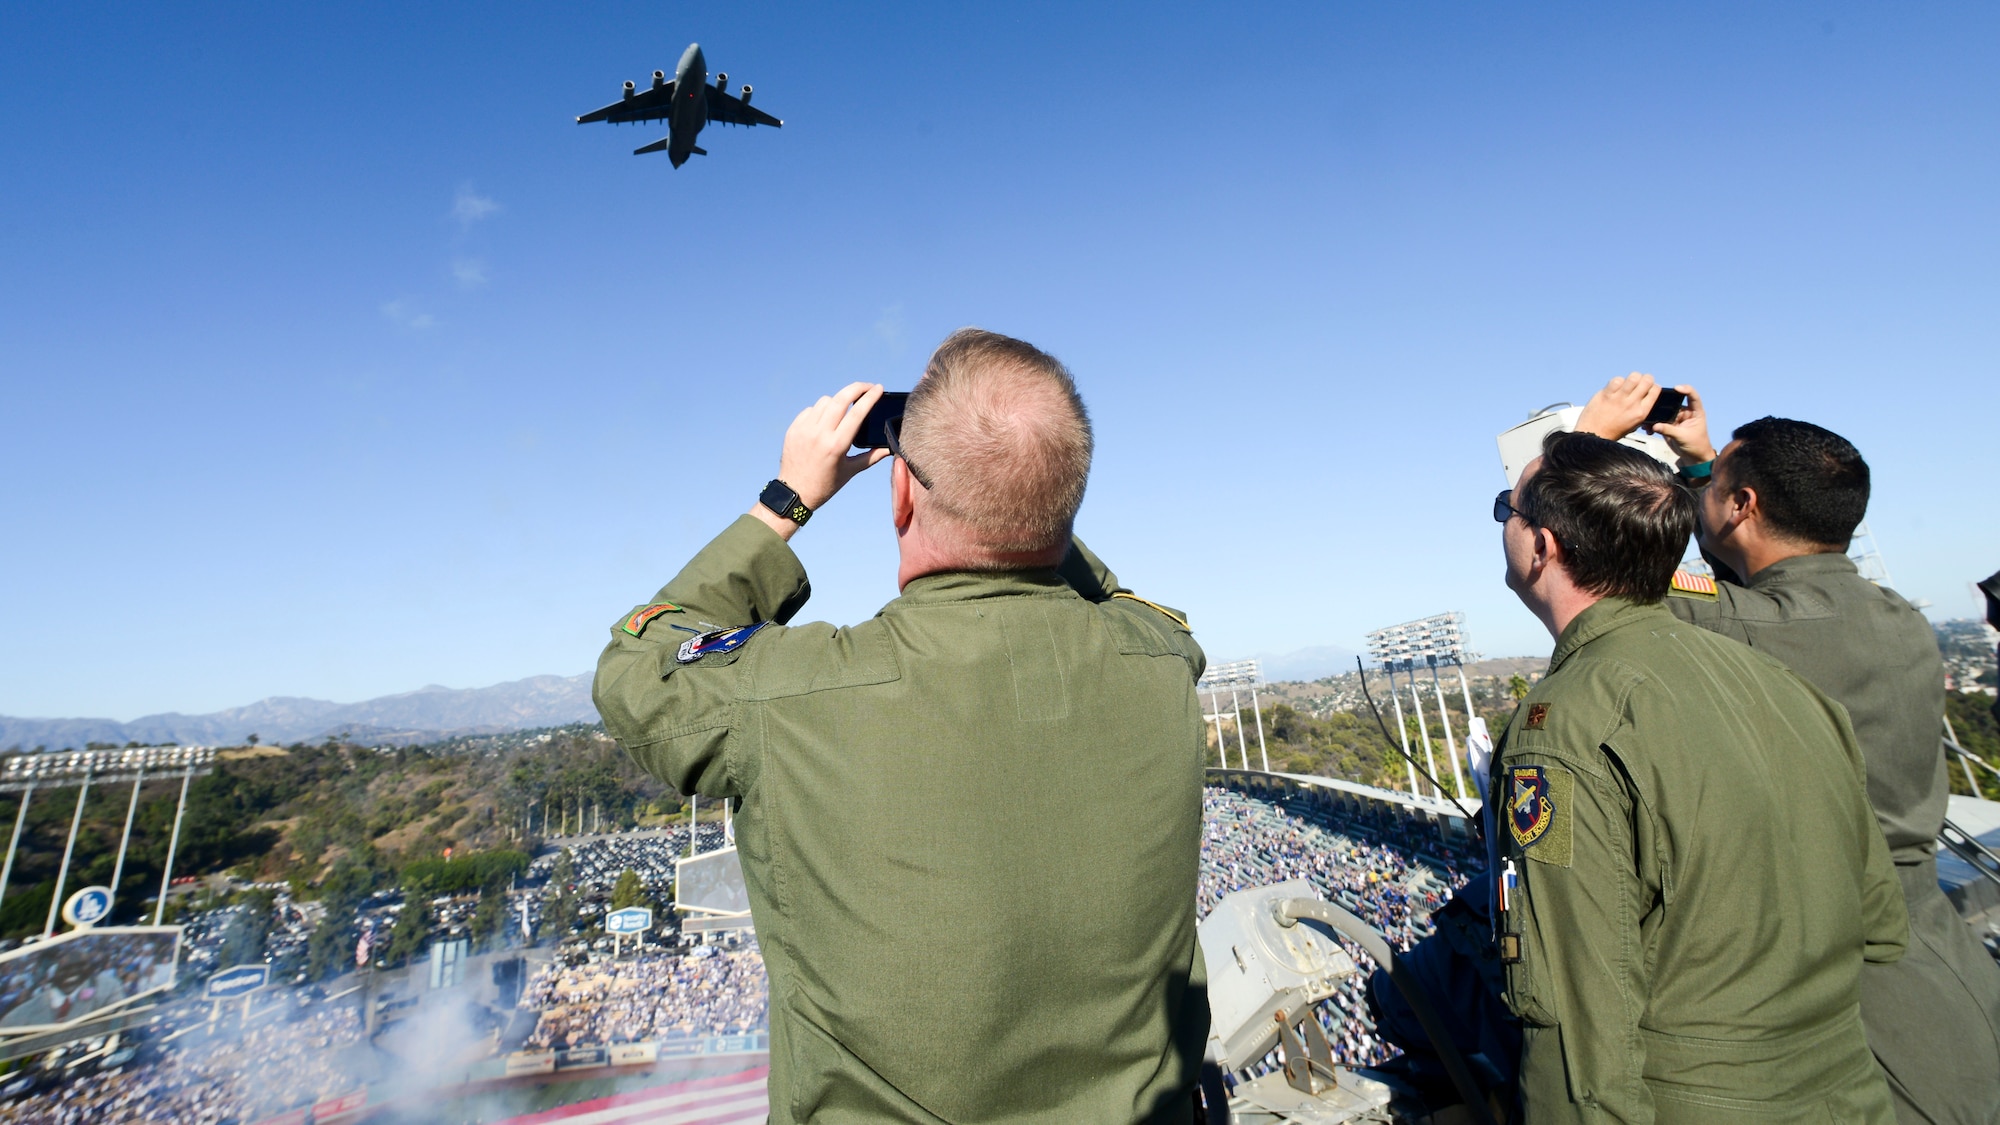 A C-17 Globemaster flies over Dodger Stadium during the opening ceremony of Game 3 of Major League Baseball’s National League Championship Series between the Los Angeles Dodgers and Milwaukee Brewers at Dodger Stadium in Los Angeles, California, Oct. 15. The C-17 began its flight from Edwards Air Force Base. Master Sgt. Caleb Patterson, Maj. Duncan Reed and Tech Sgt. Robert Villa (left to right), all with 418th Flight Test Squadron, 412th Test Wing, coordinated with the C-17’s flight crew to time the plane’s flyover with singing of the National Anthem. (U.S. Air Force photo by Giancarlo Casem)